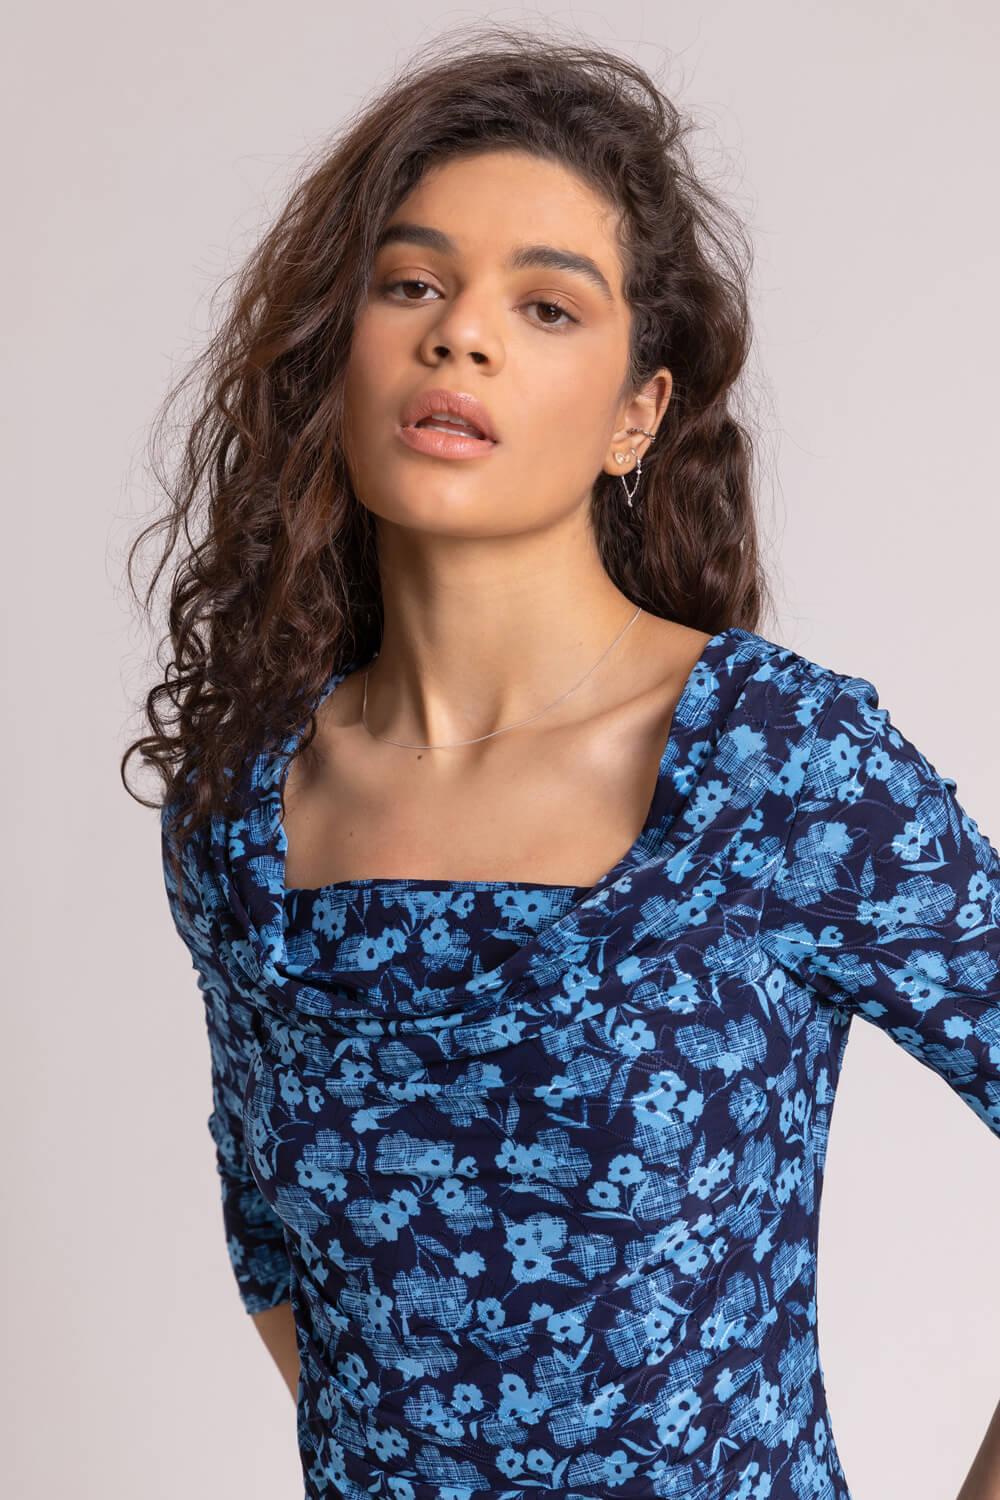 Blue Floral Print Cowl Neck Top, Image 4 of 4